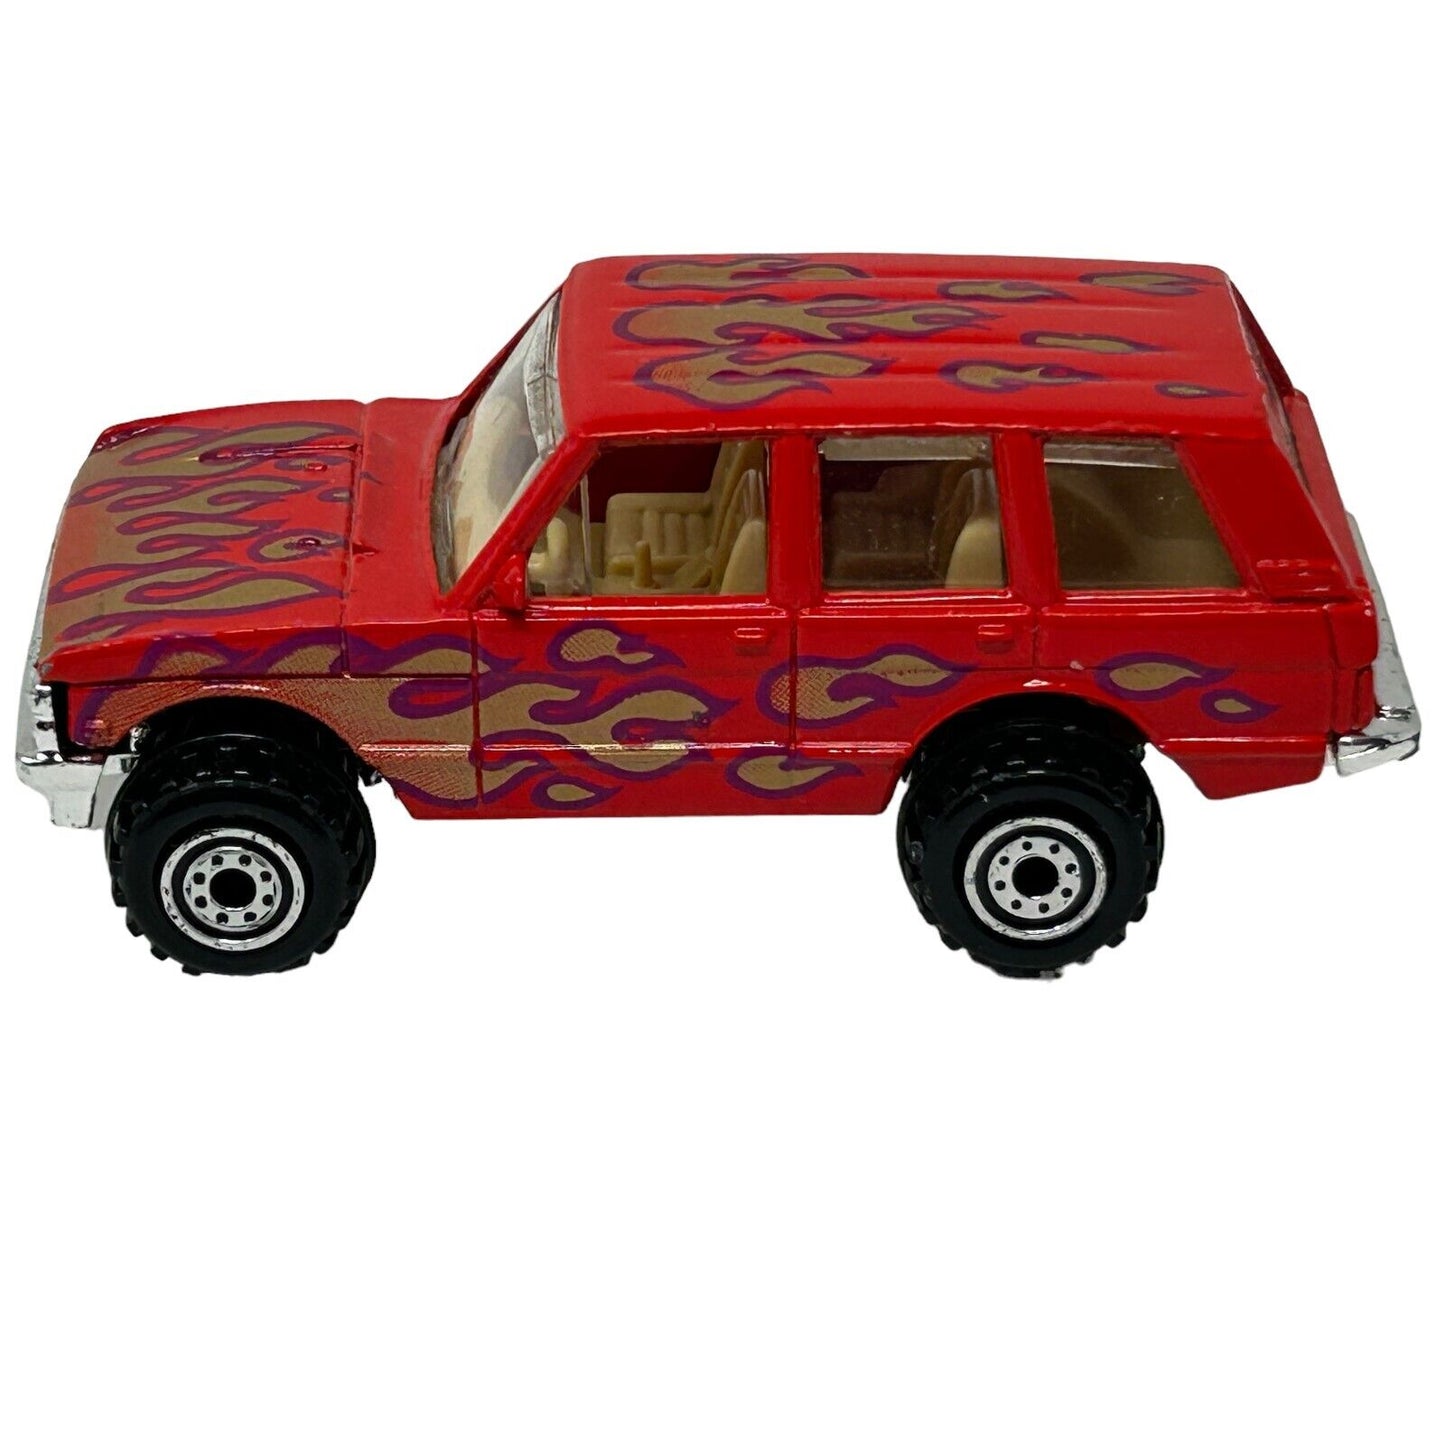 Range Rover Hot Wheels Collectible Diecast Car Red Vintage 90s Toy Vehicle